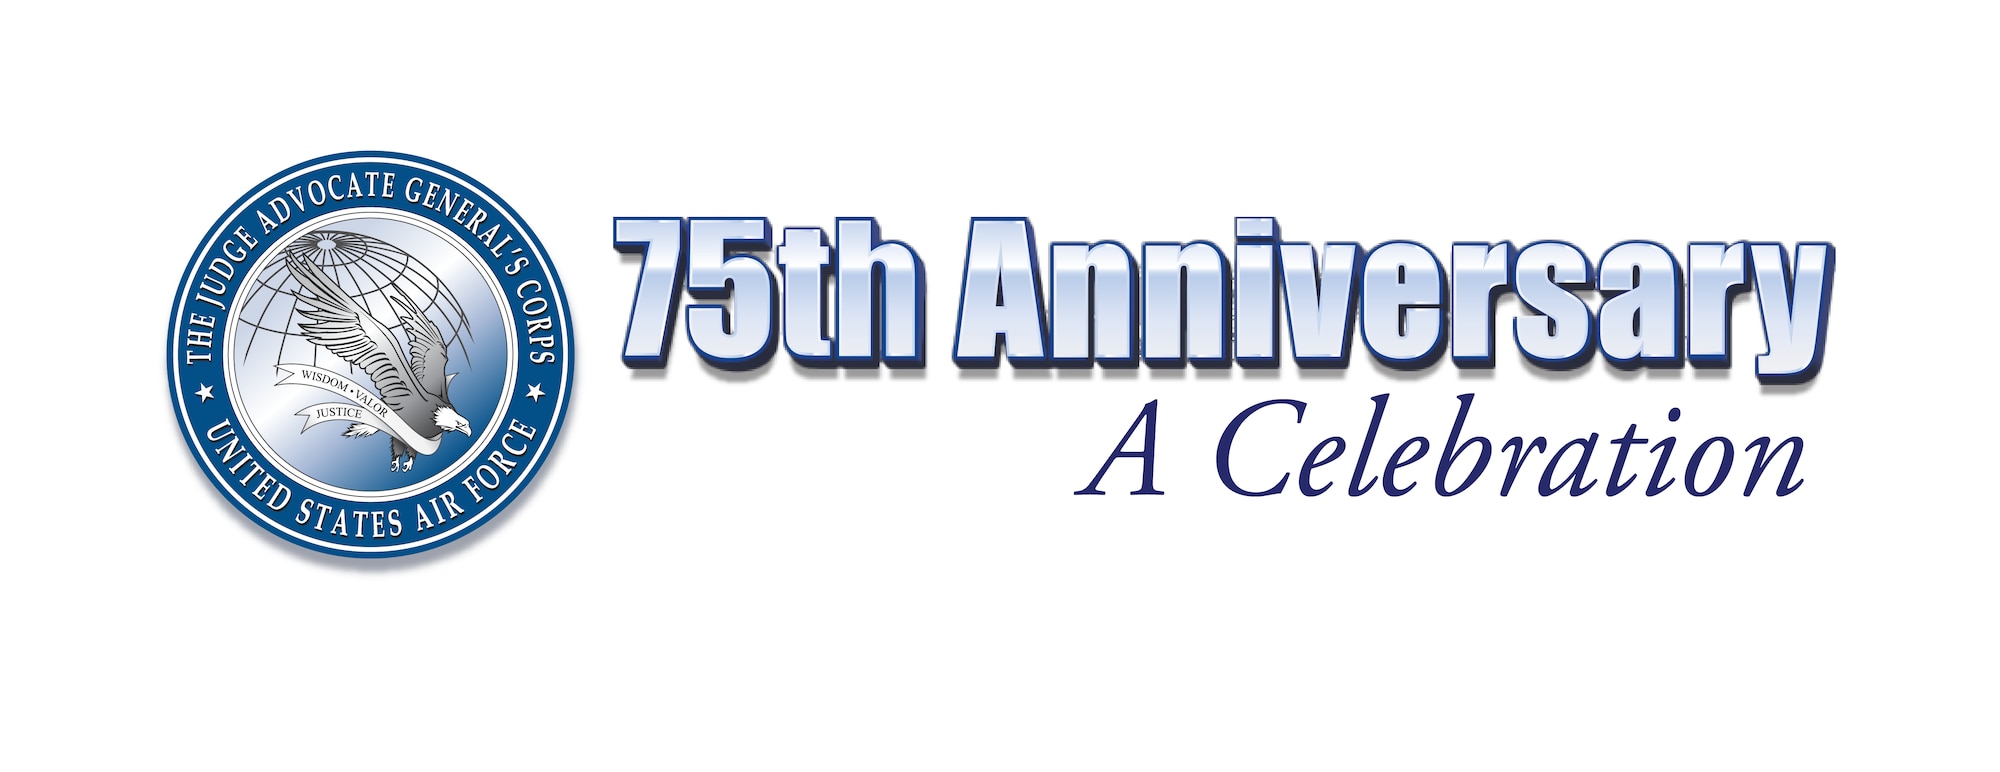 Judge Advocate General's Corps seal and 75th Anniversary celebration text.